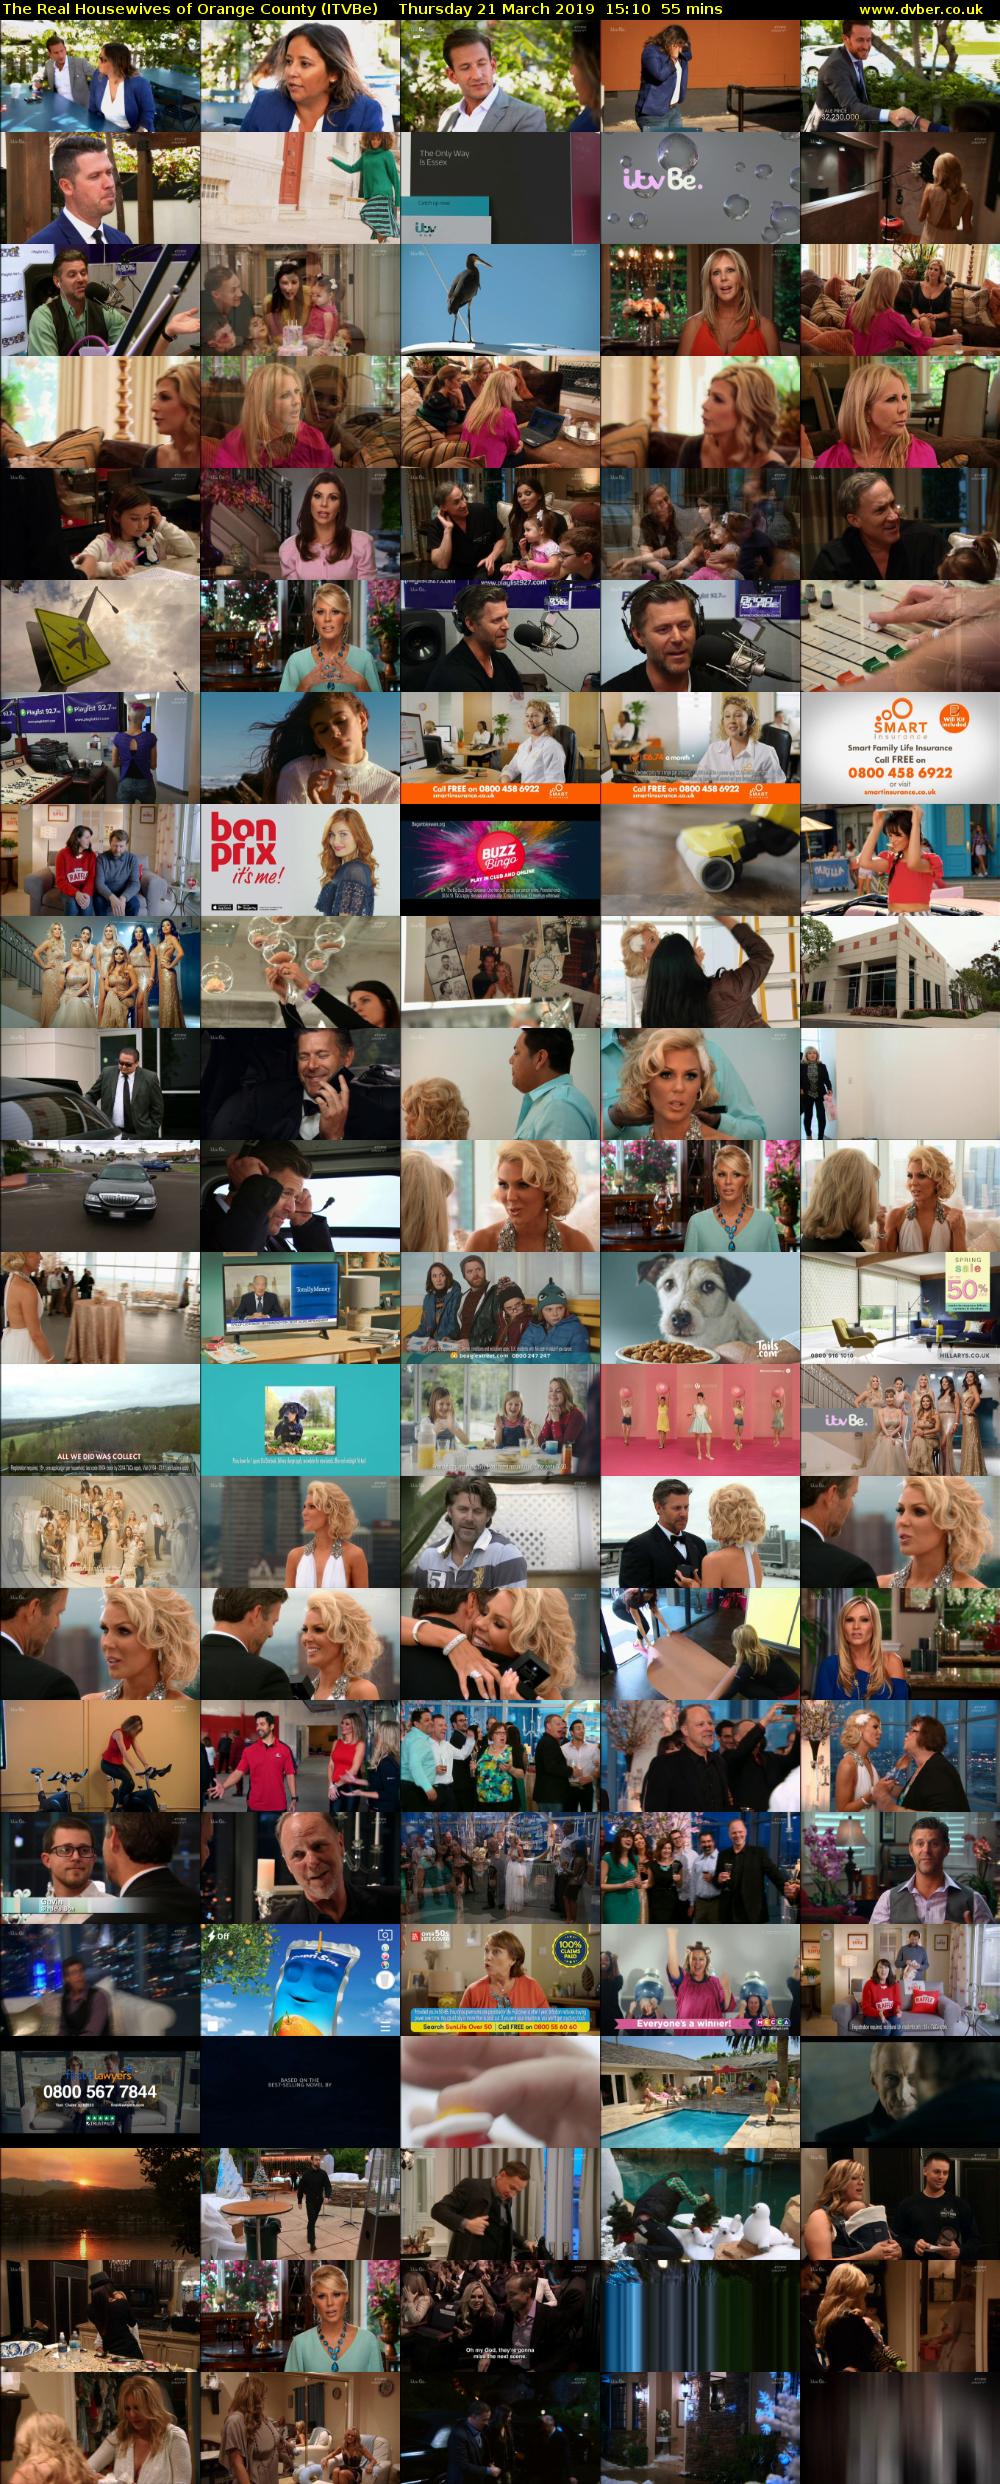 The Real Housewives of Orange County (ITVBe) Thursday 21 March 2019 15:10 - 16:05